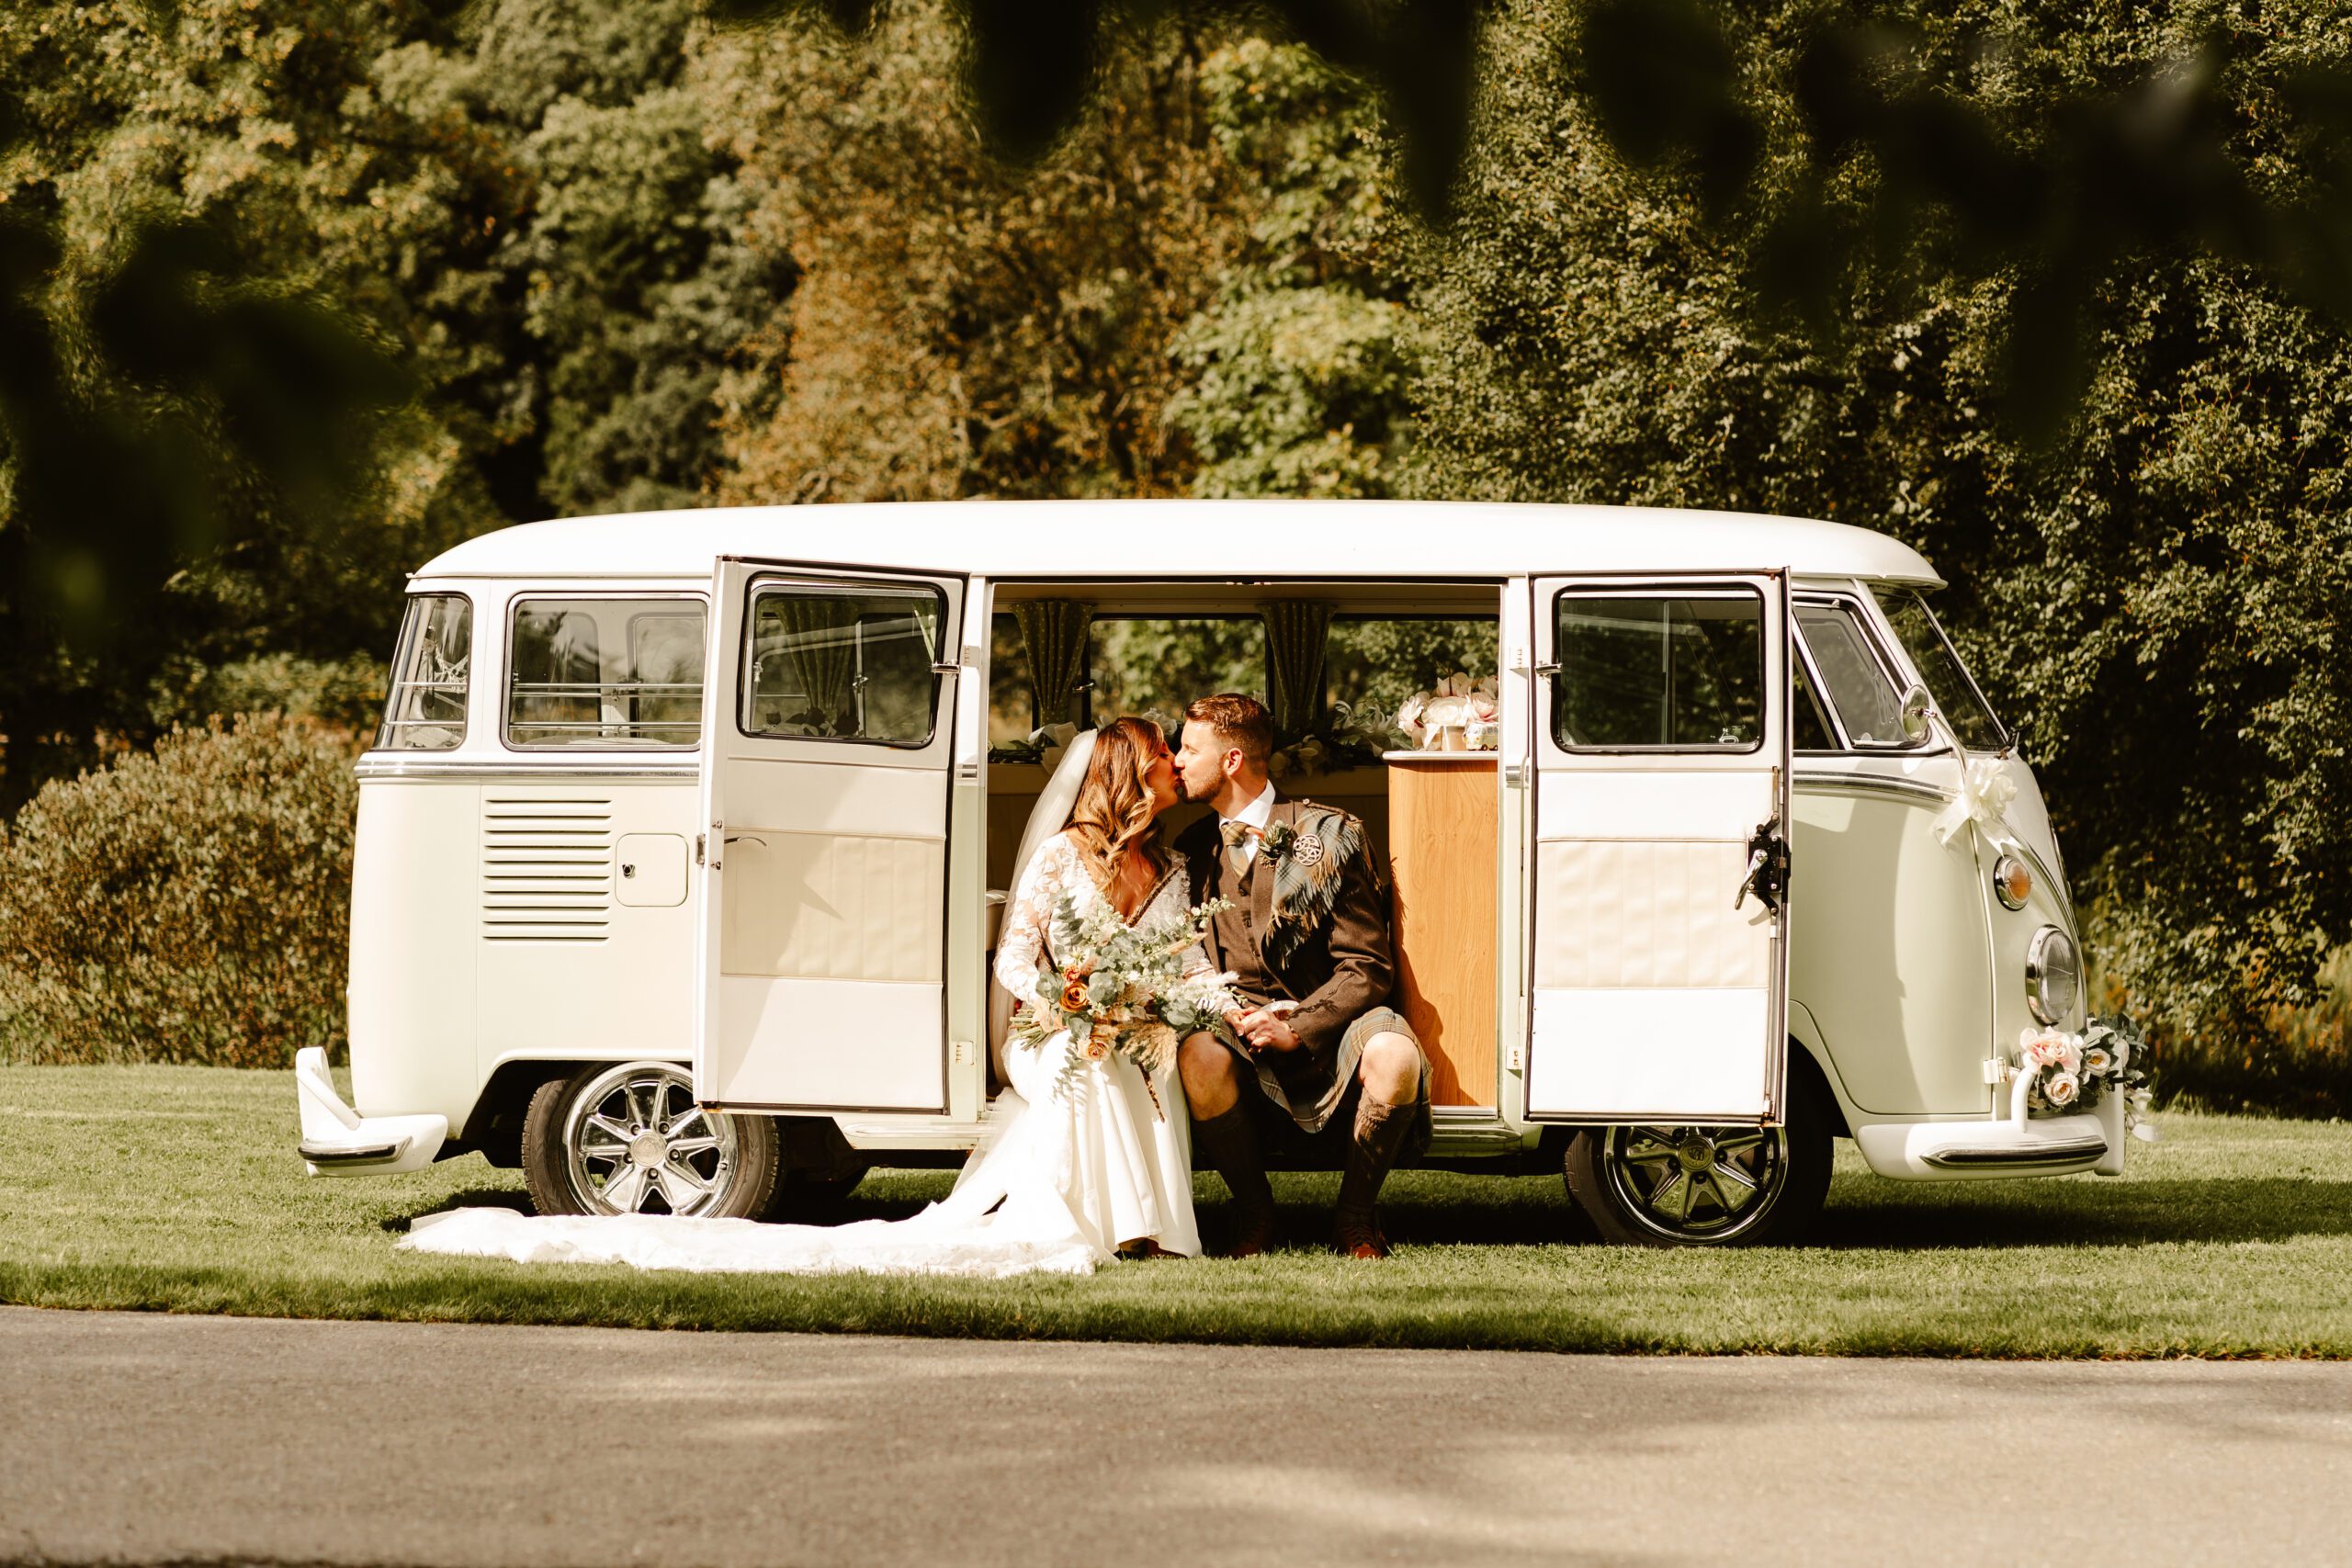 Couple sitting in a camper van for their wedding at Aswanley